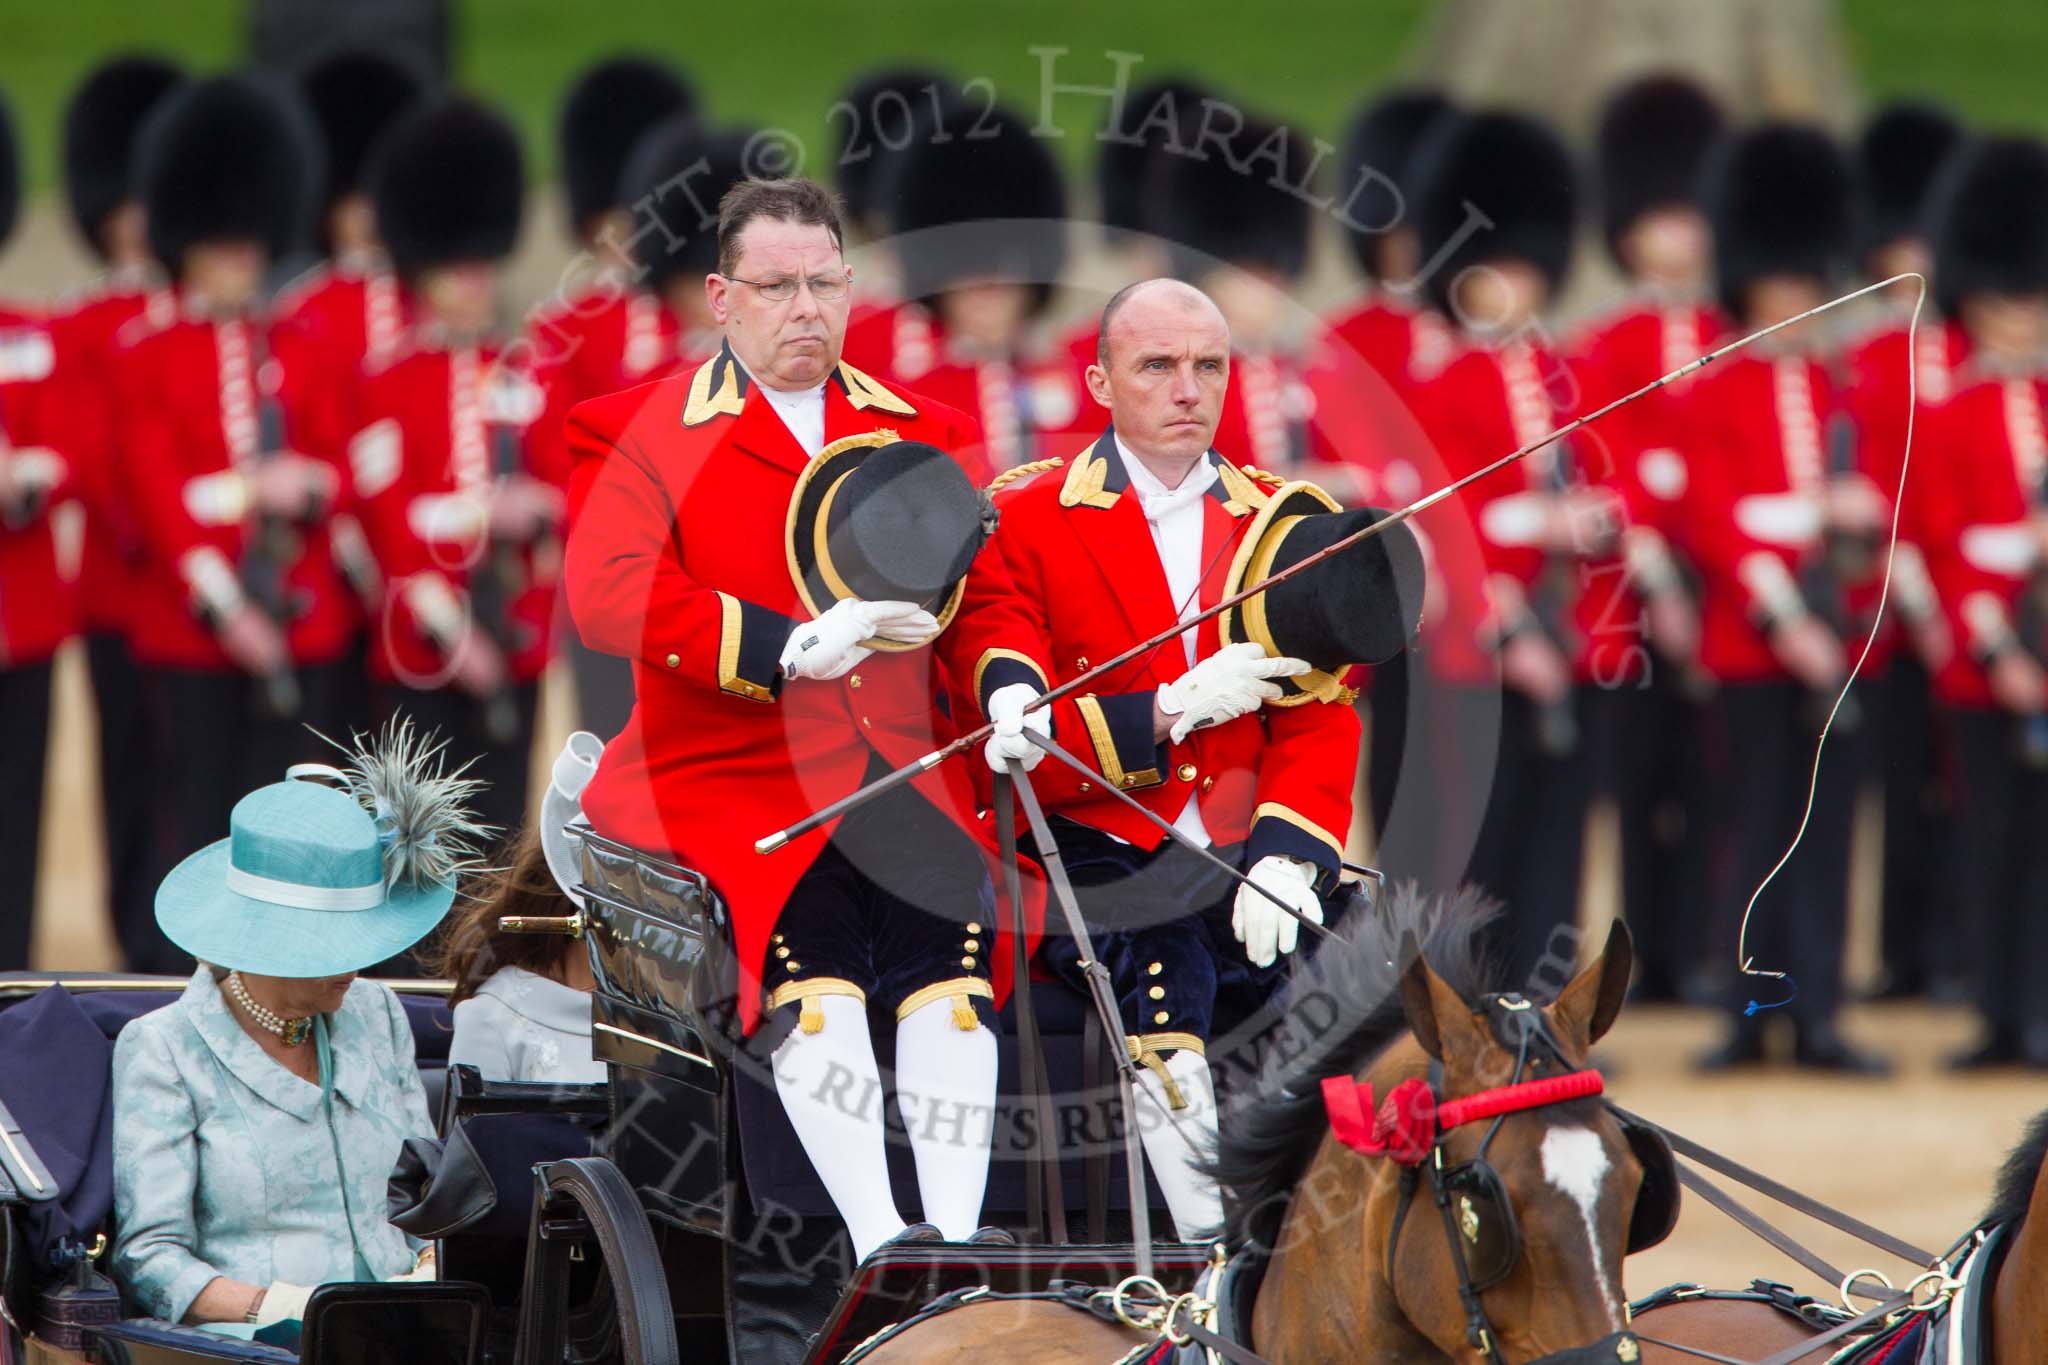 Trooping the Colour 2012: The coachmen of the first carriage saluting the Colour..
Horse Guards Parade, Westminster,
London SW1,

United Kingdom,
on 16 June 2012 at 10:50, image #121